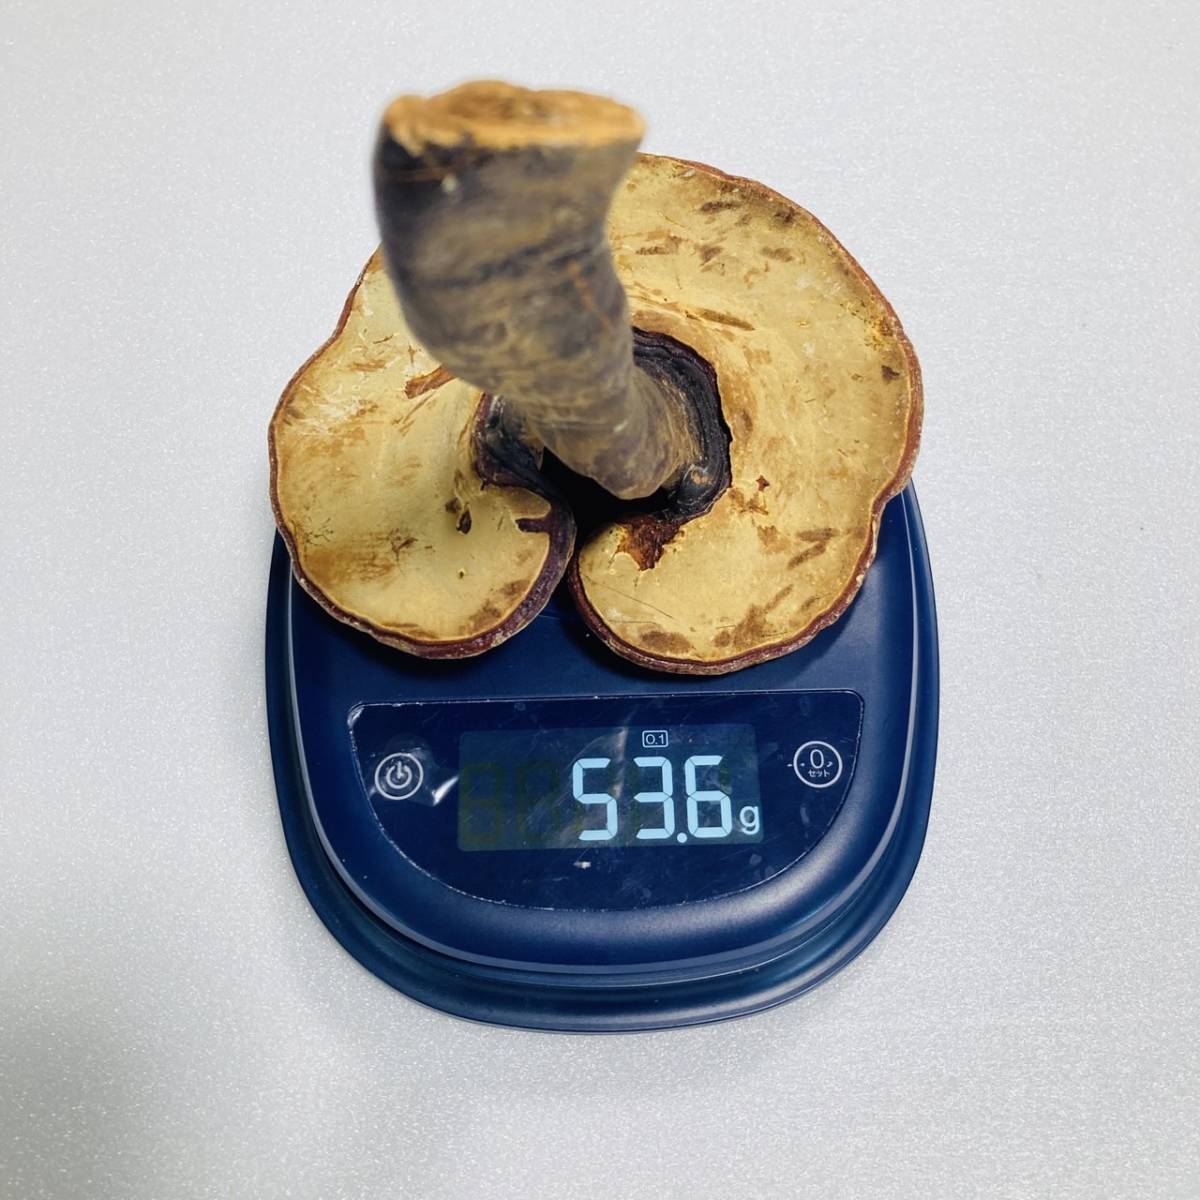 [ superior article!] bracket fungus mannentake 3 pcs set 60g rom and rear (before and after) * free shipping * 3,300 jpy ~ monkey noko deer ke mushrooms 